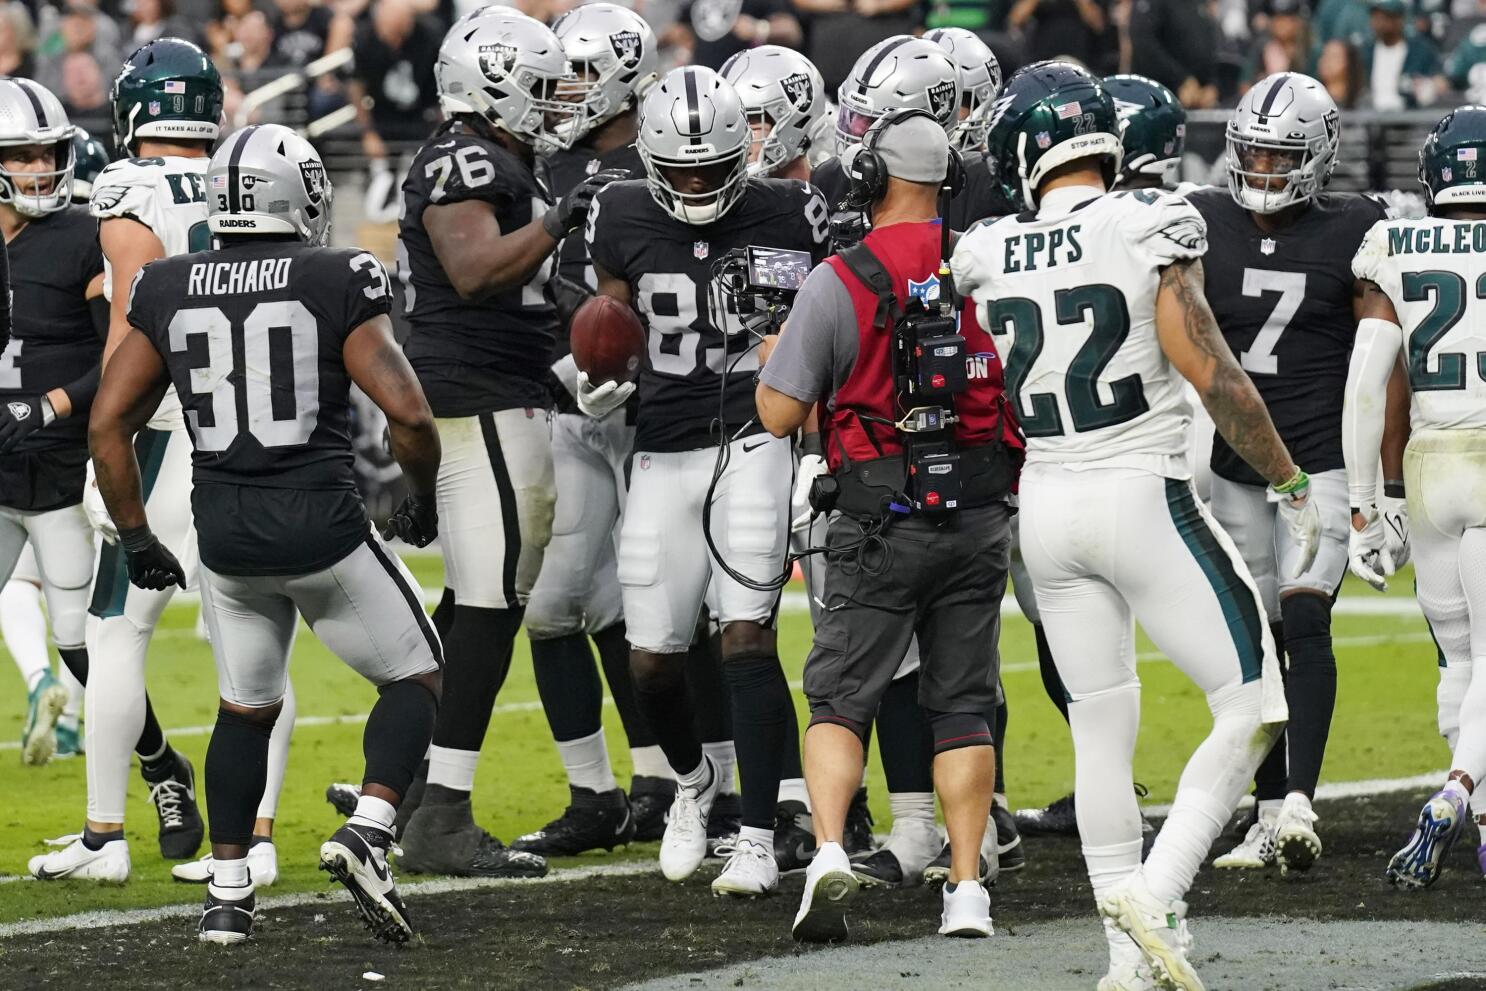 Raiders' offensive line dominant in win over Eagles